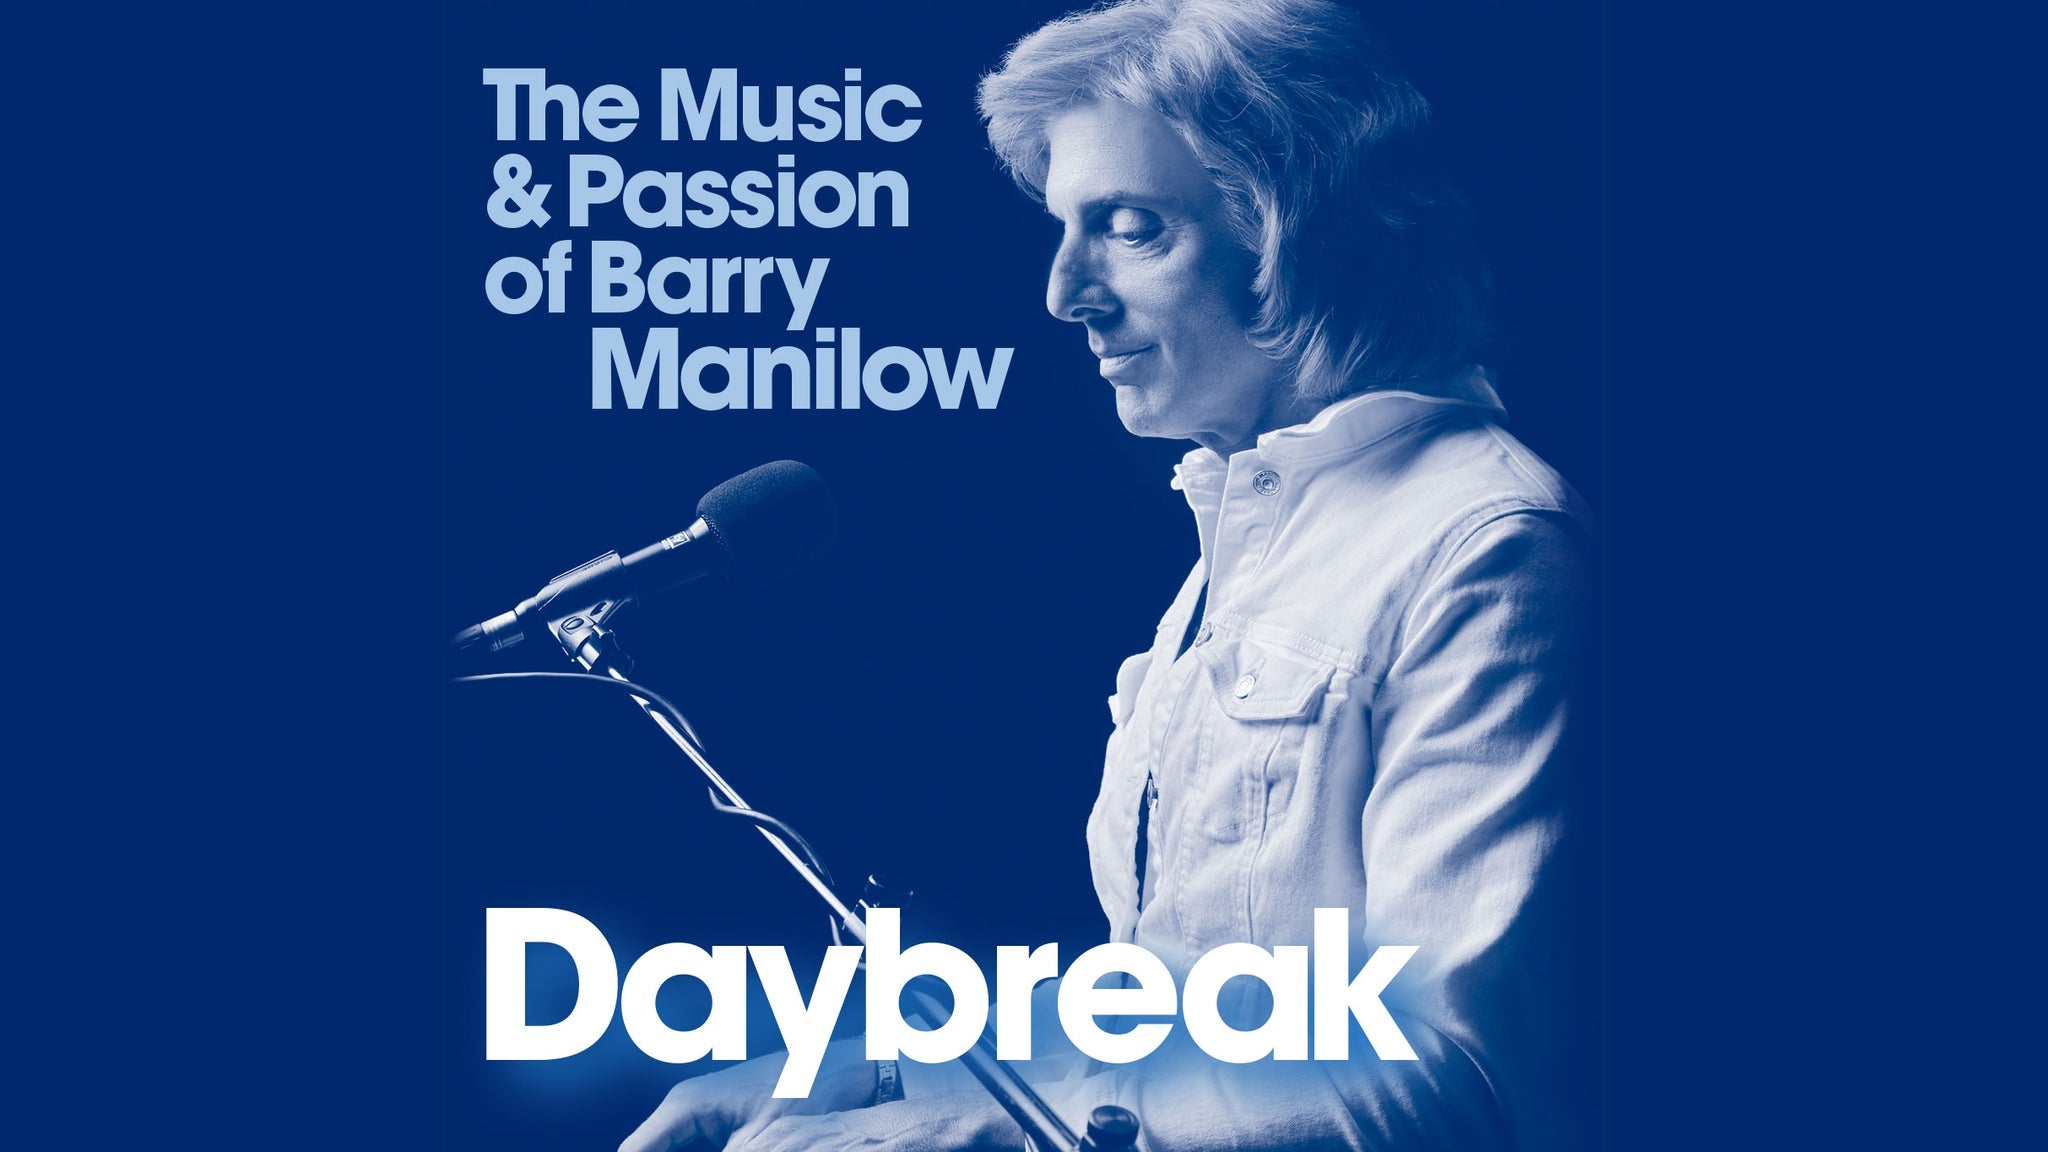 DAYBREAK - The Music & Passion of Barry Manilow